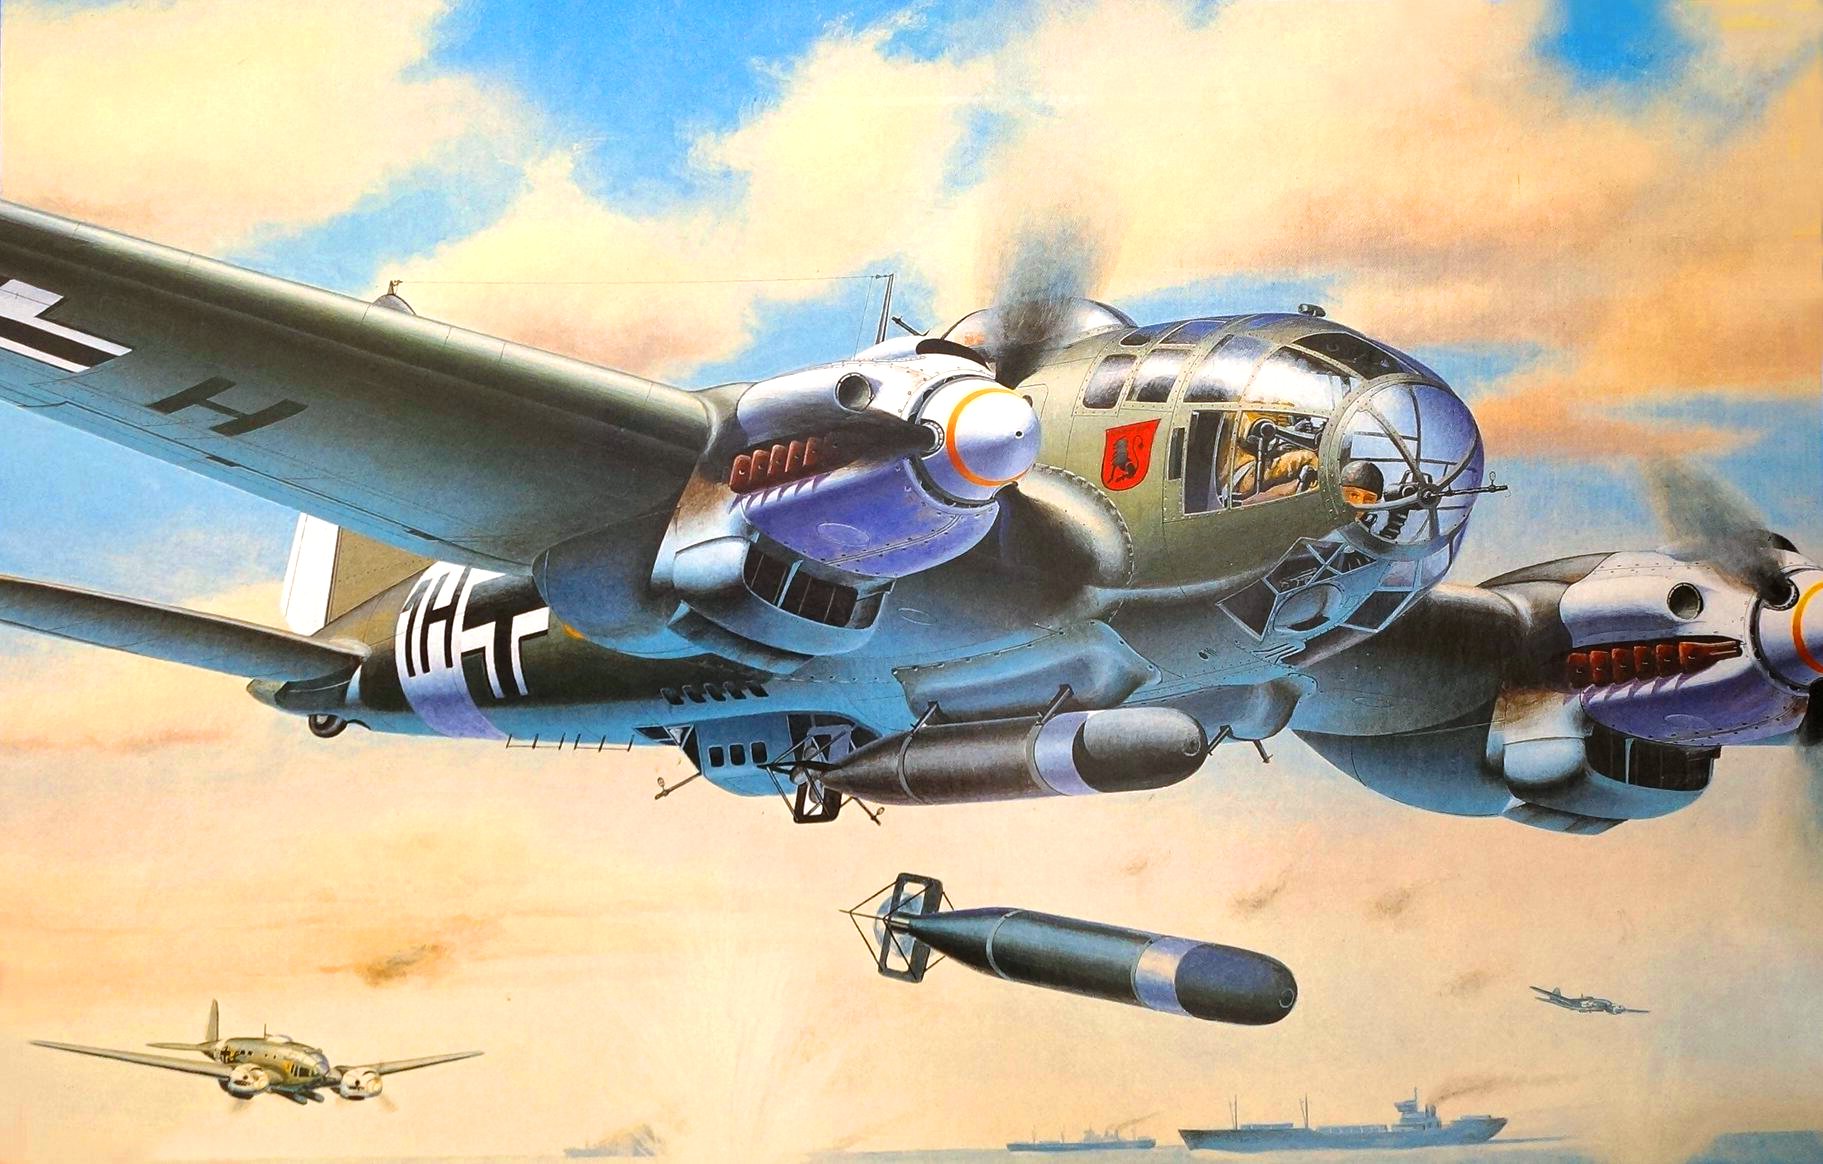 World War War World War Ii Military Military Aircraft Aircraft Airplane Bomber Germany Luftwaffe Air 1823x1164